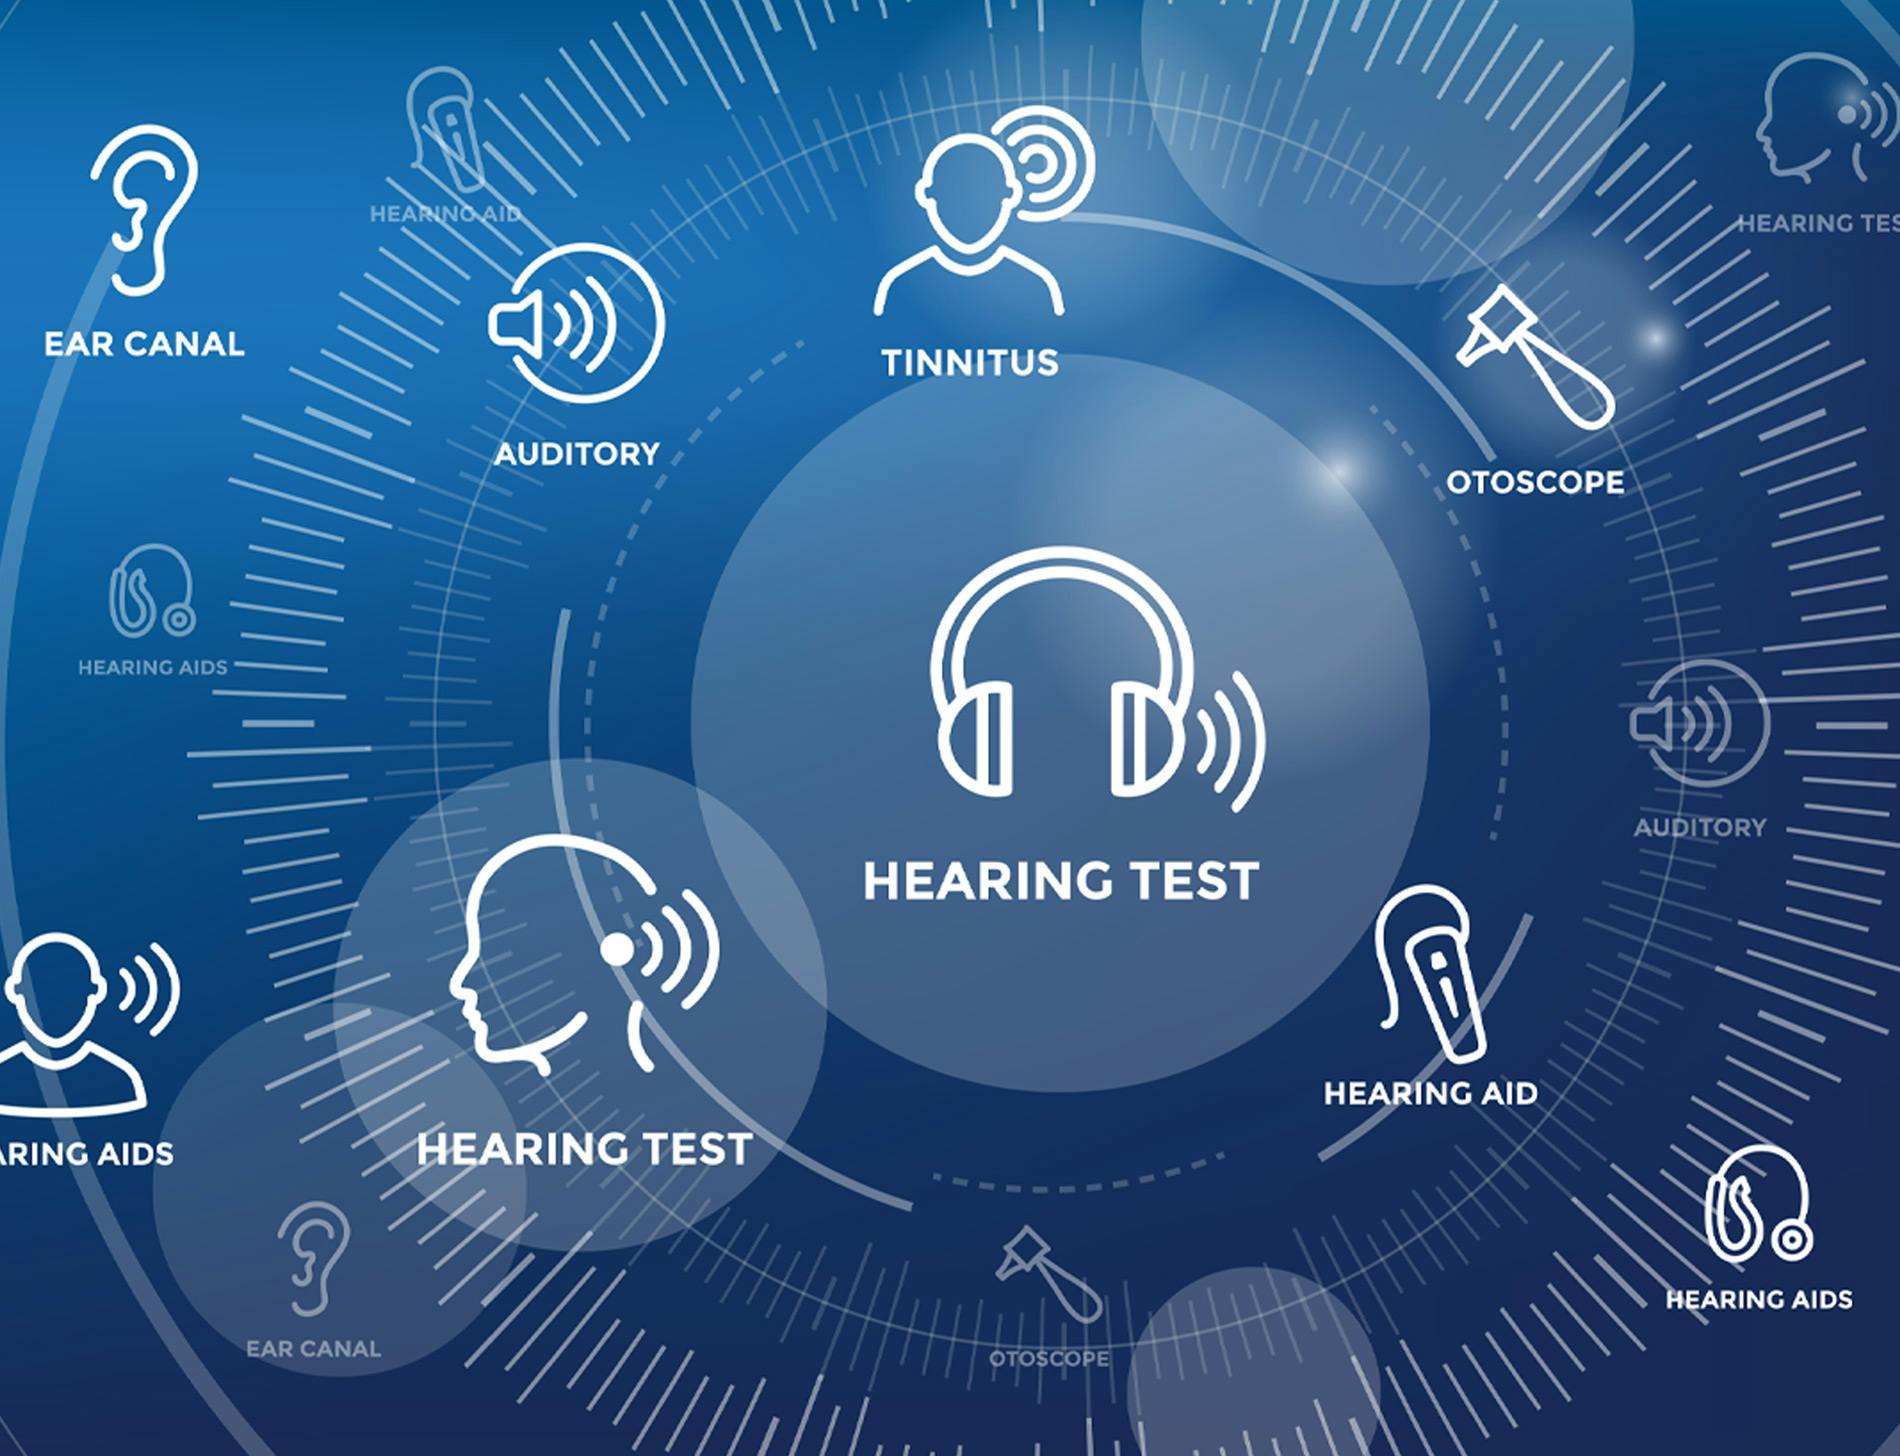 Multiple hearing type icons in a collage